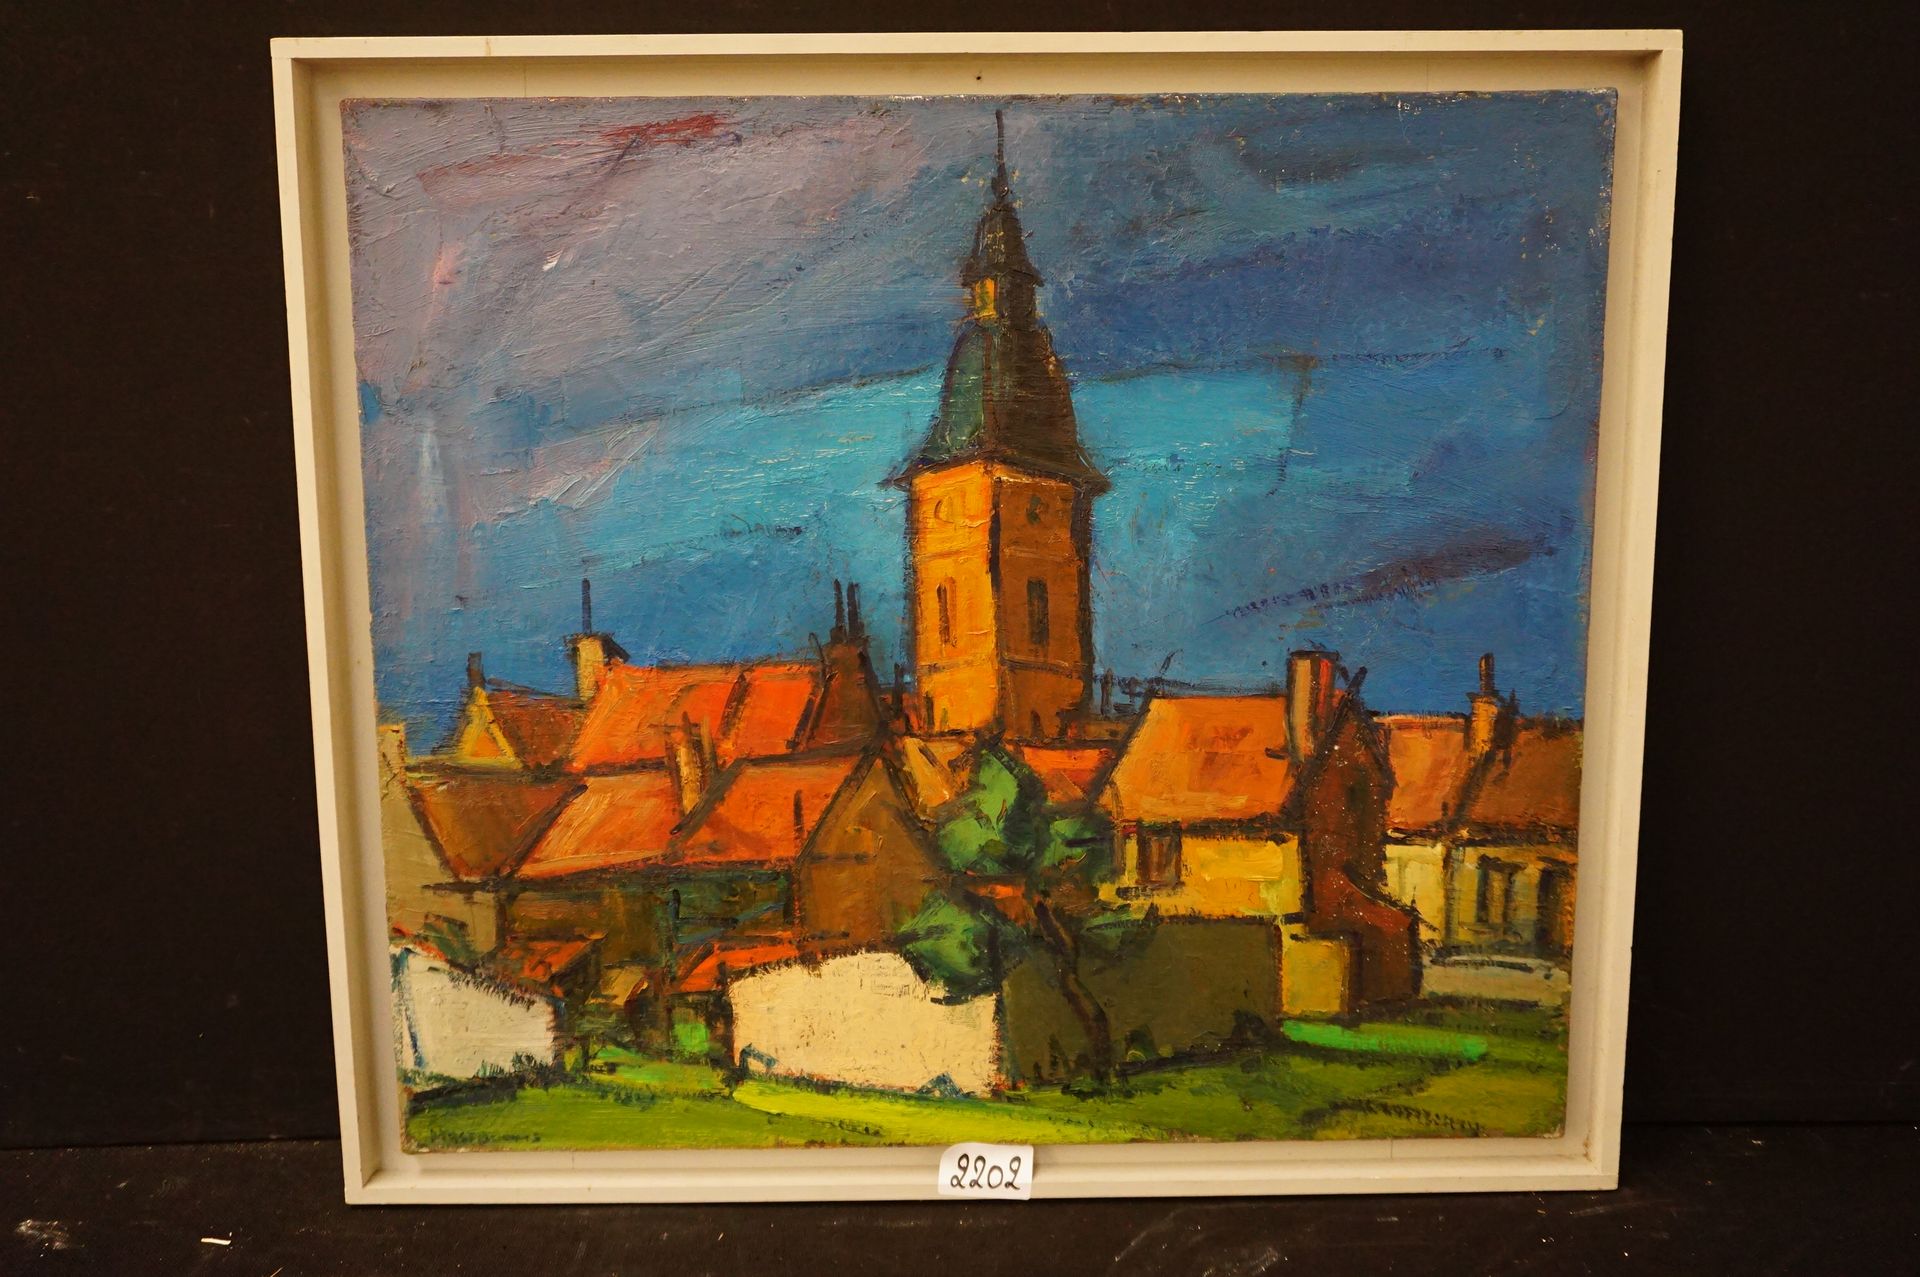 MASTBOOM "The old church of Merksem" - Oil on canvas - Signed - Reverse signed -&hellip;